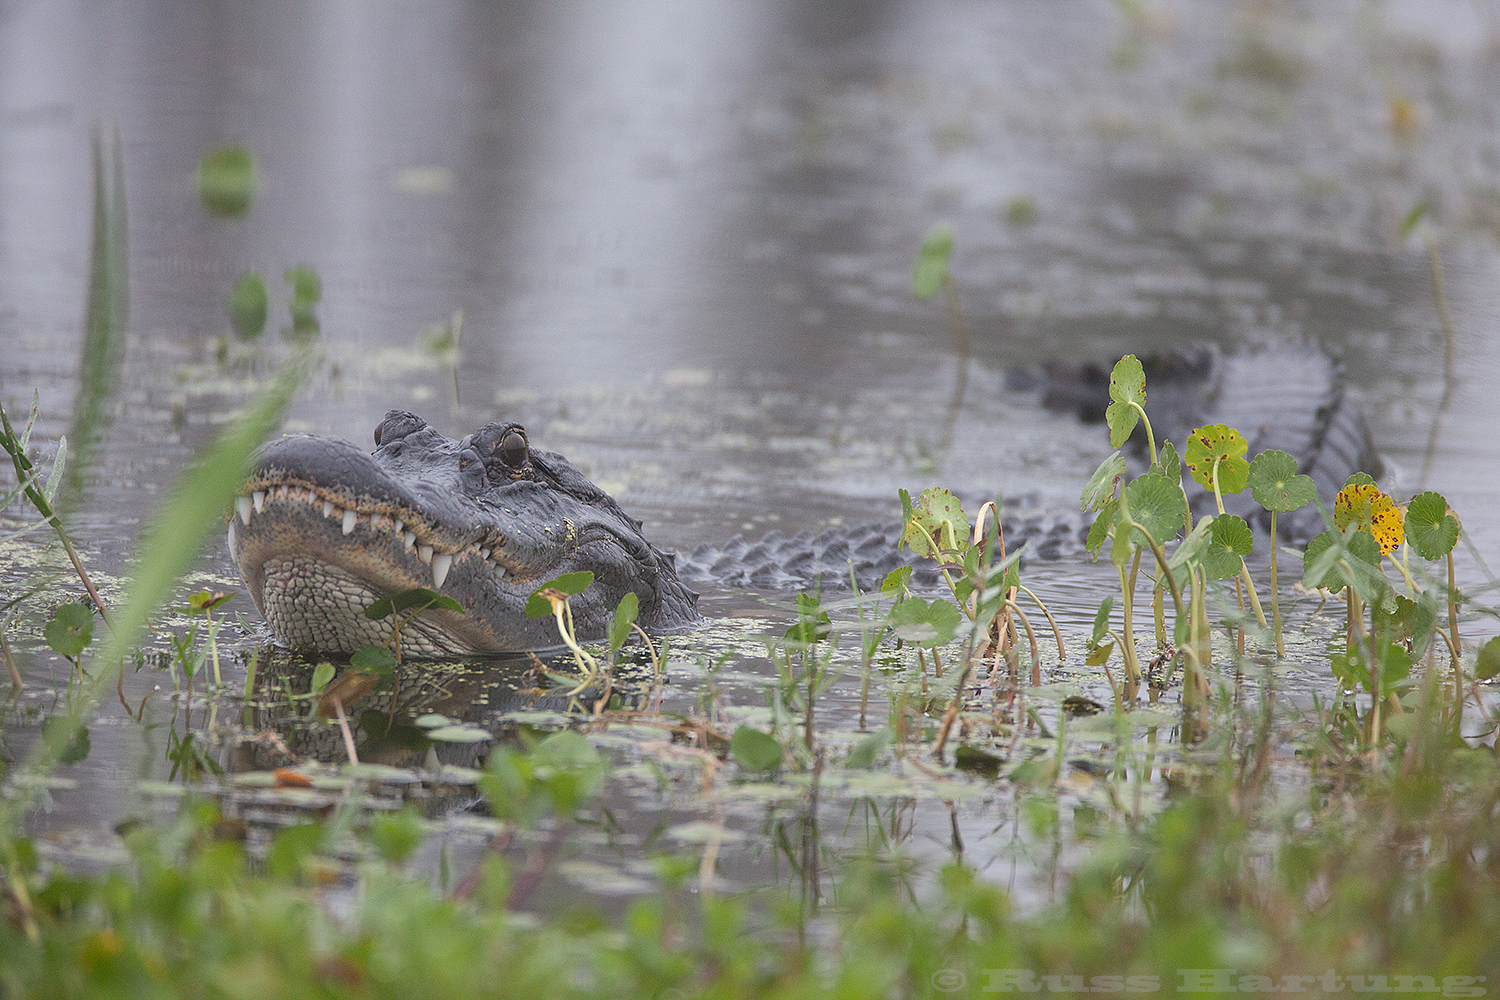 Alligator making a territorial display - Orlando Wetlands Park - Florida. When I first heard him growl I thought it was a Harley. 